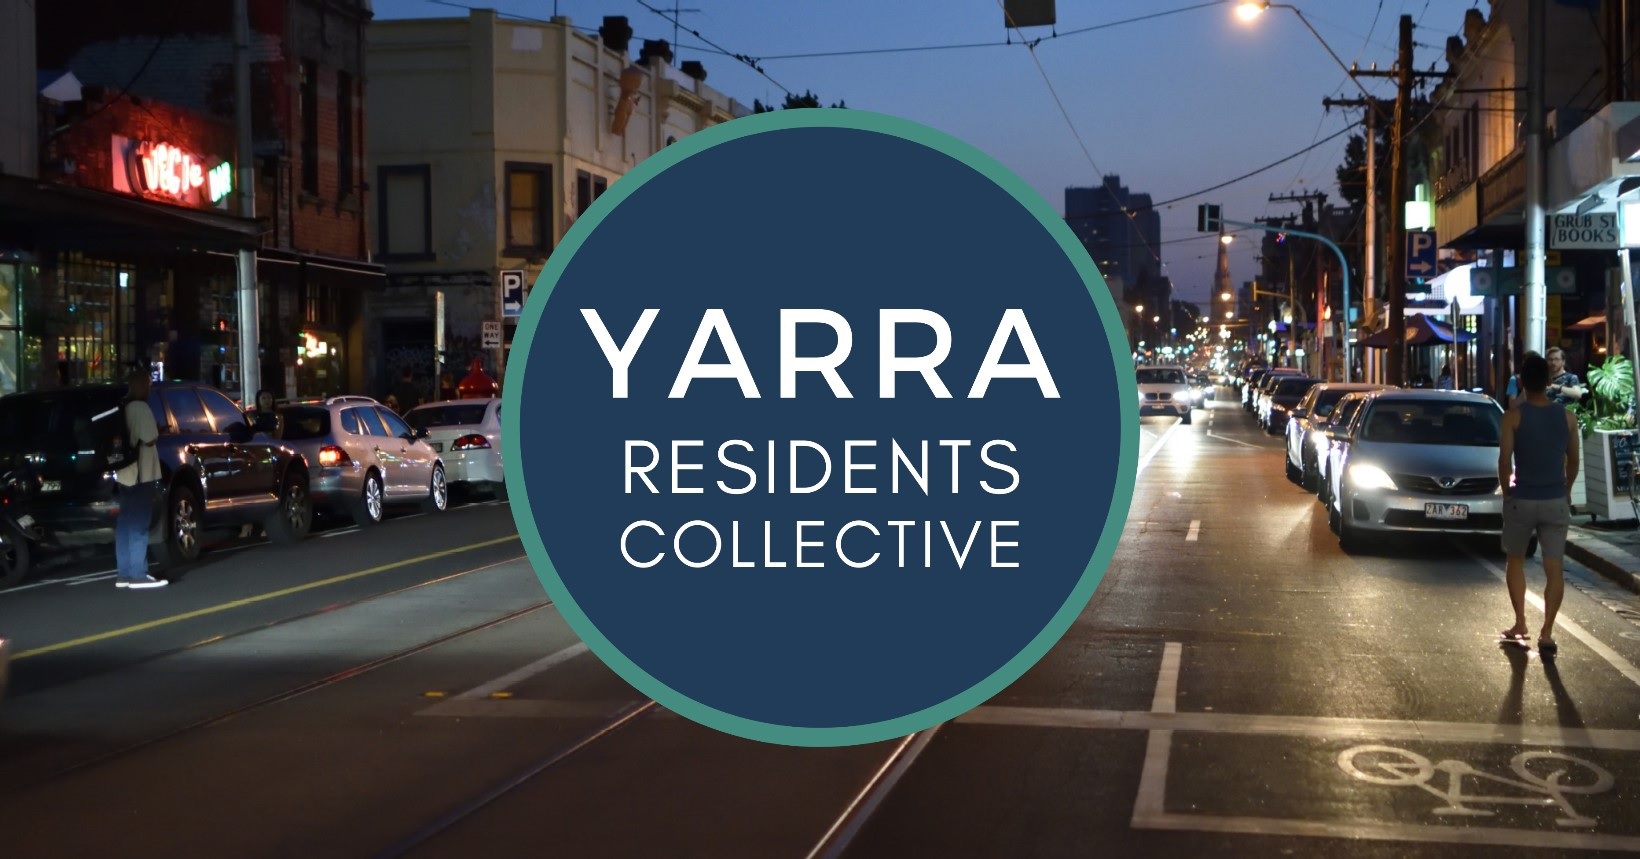 Yarra Residents Collective